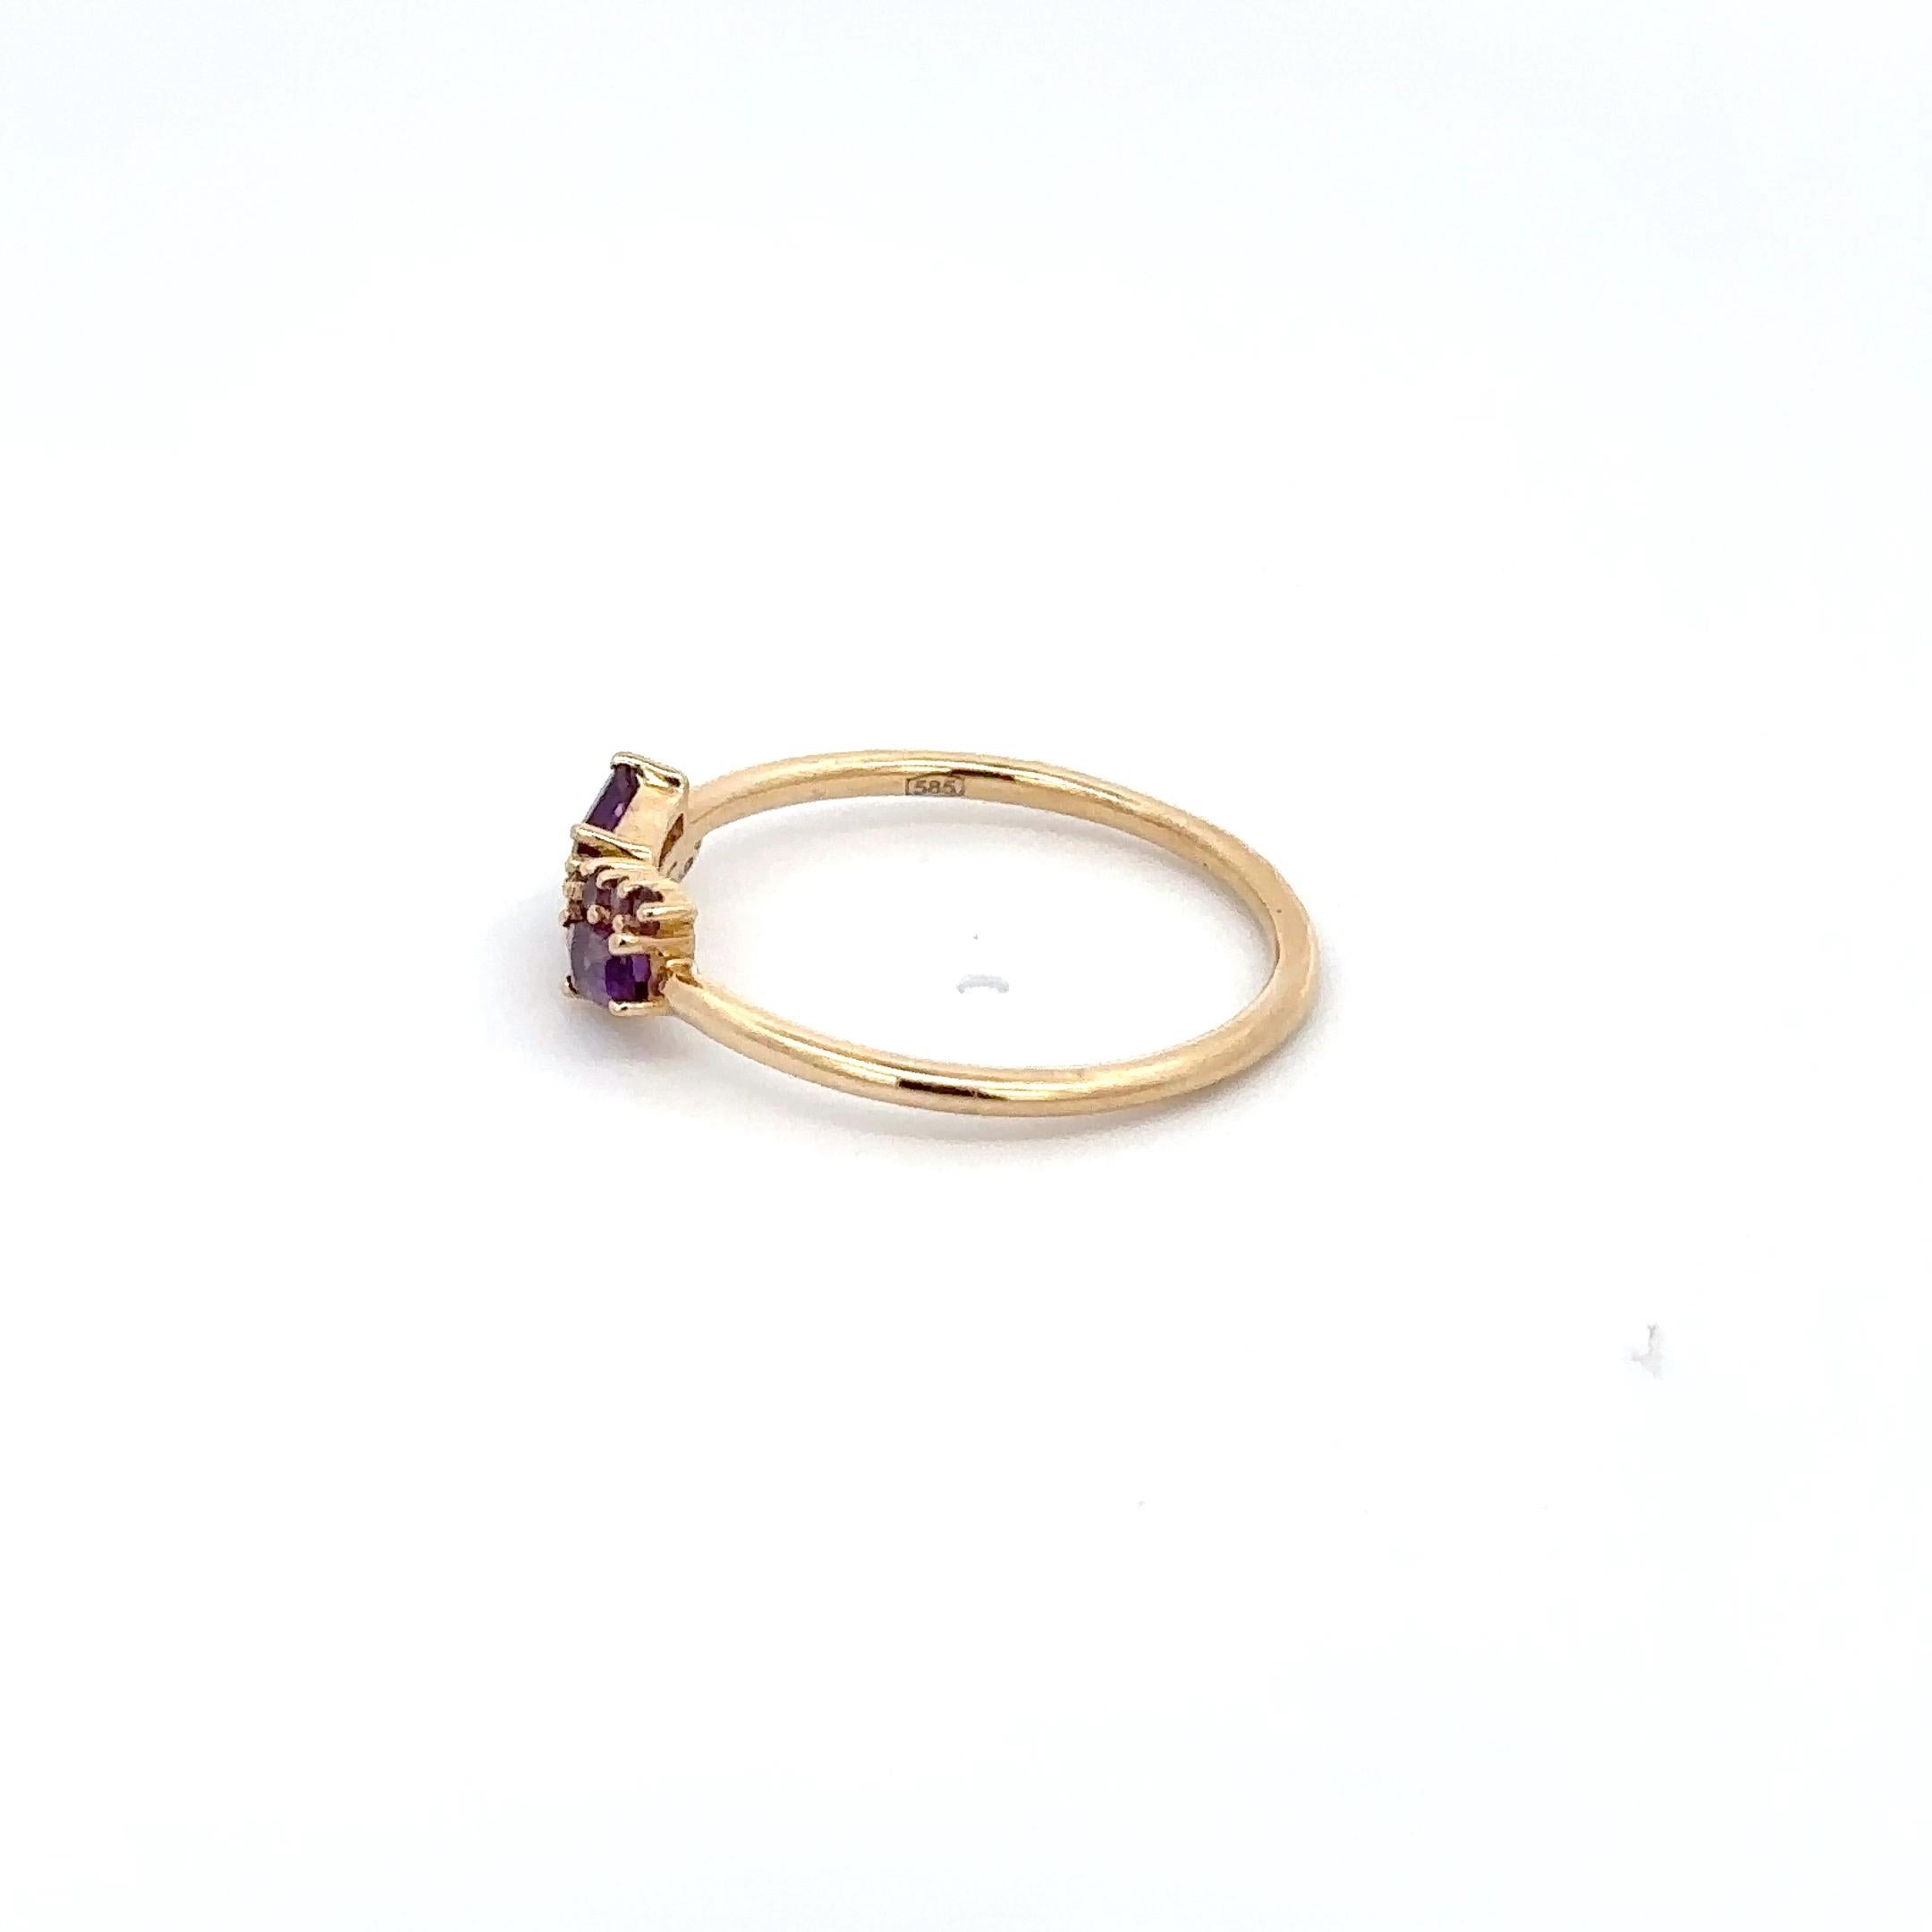 For Sale:  Everyday Wear Asymmetrical Amethyst Ring For Her in 14k Solid Yellow Gold 7